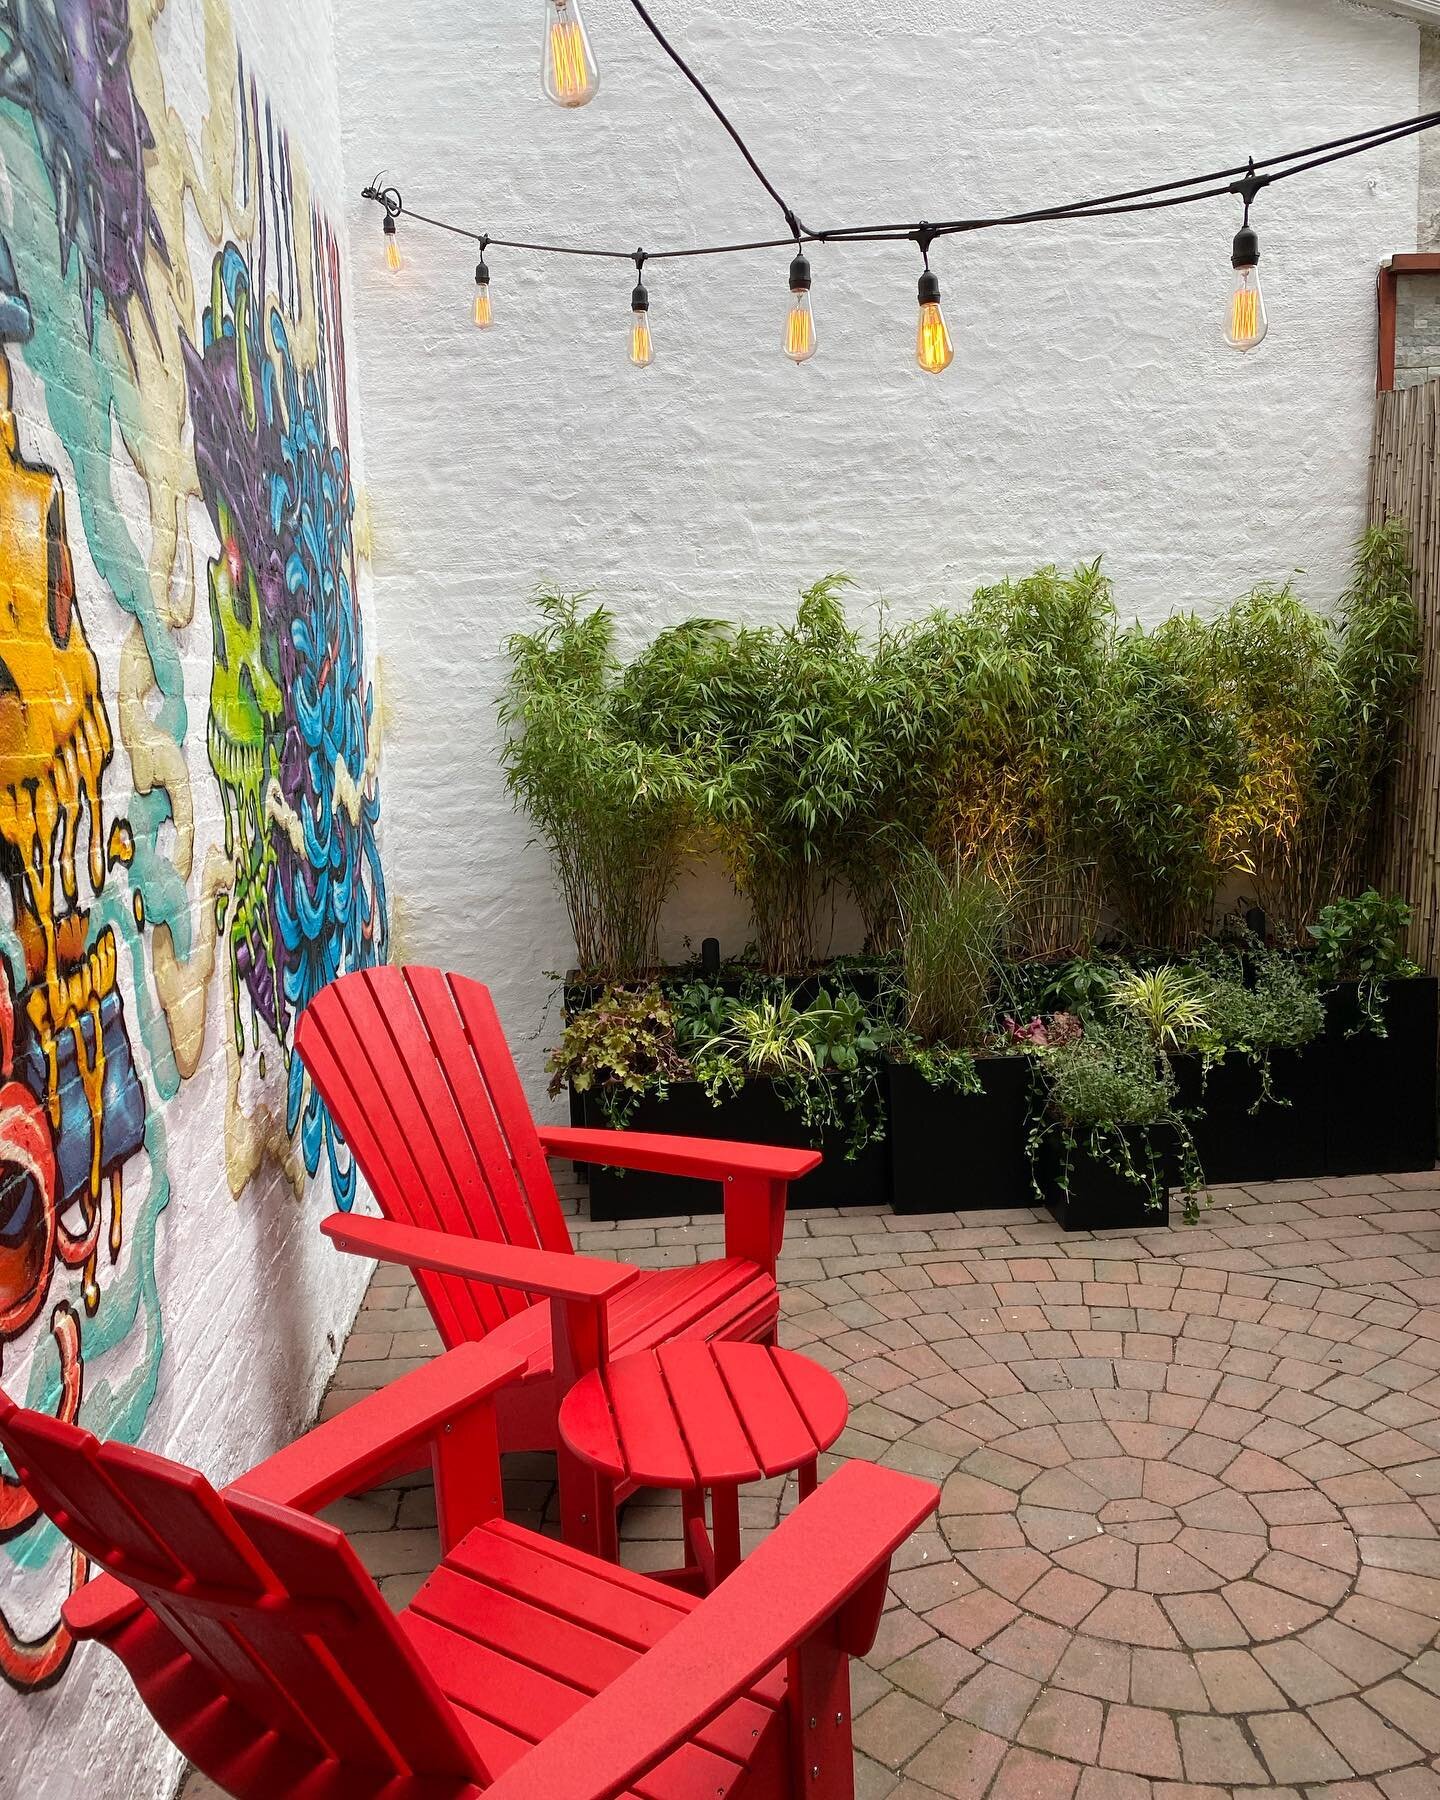 These Jersey City clients wanted to keep it keep it classic with a pop. Design elements include: matte black fiberglass planters, bamboo with uplighting, and mix perennials for a lush backdrop to their custom graffiti wall. 

.
.
.
.
.
#citylandscape